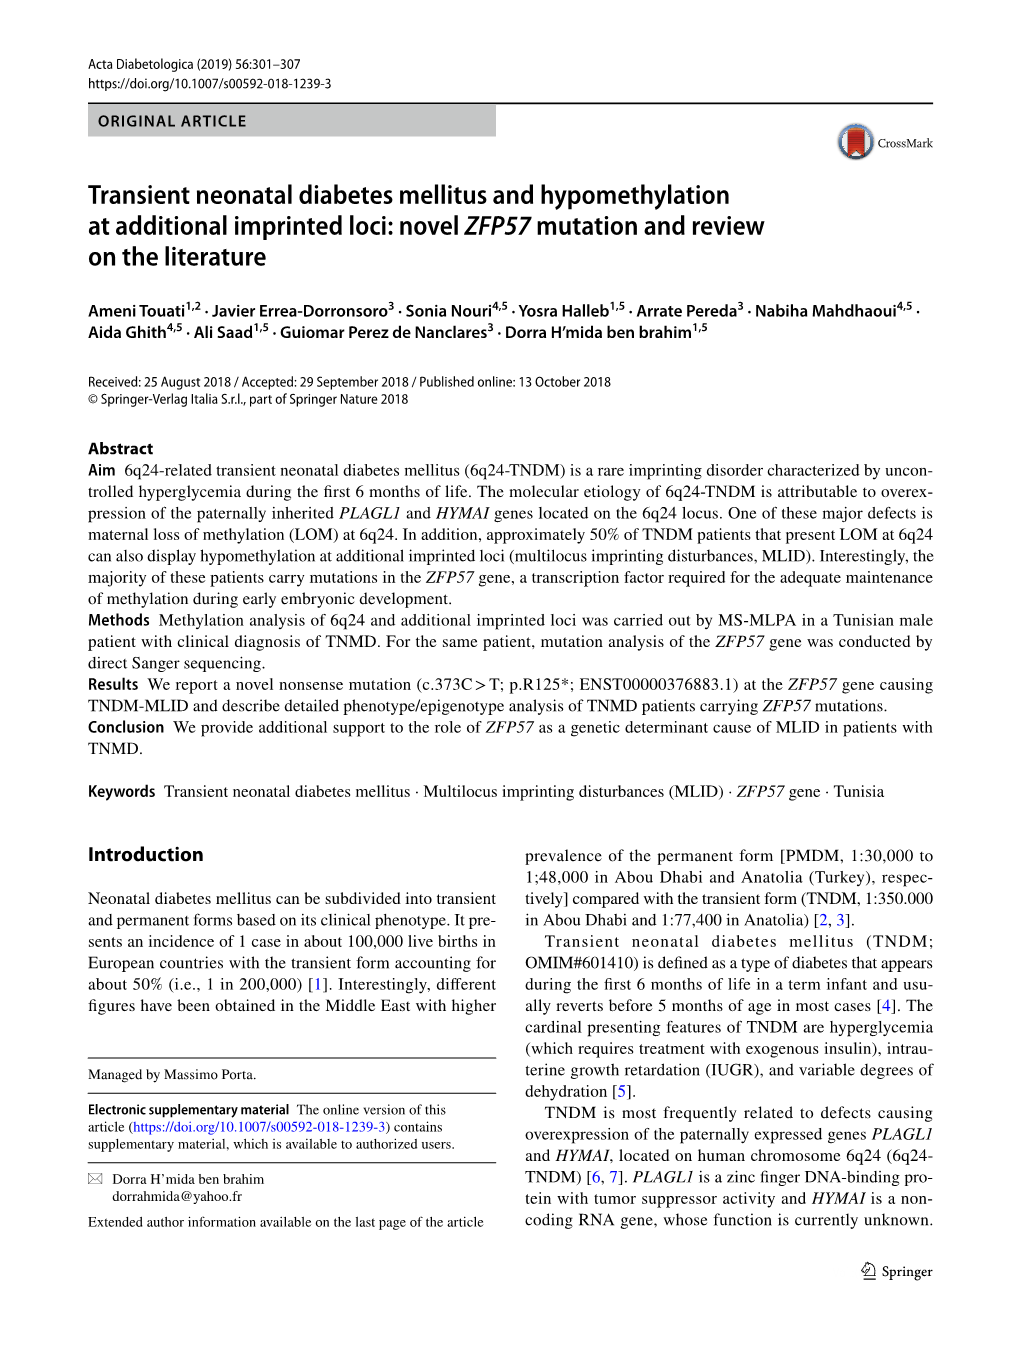 Transient Neonatal Diabetes Mellitus and Hypomethylation at Additional Imprinted Loci: Novel ZFP57 Mutation and Review on the Literature